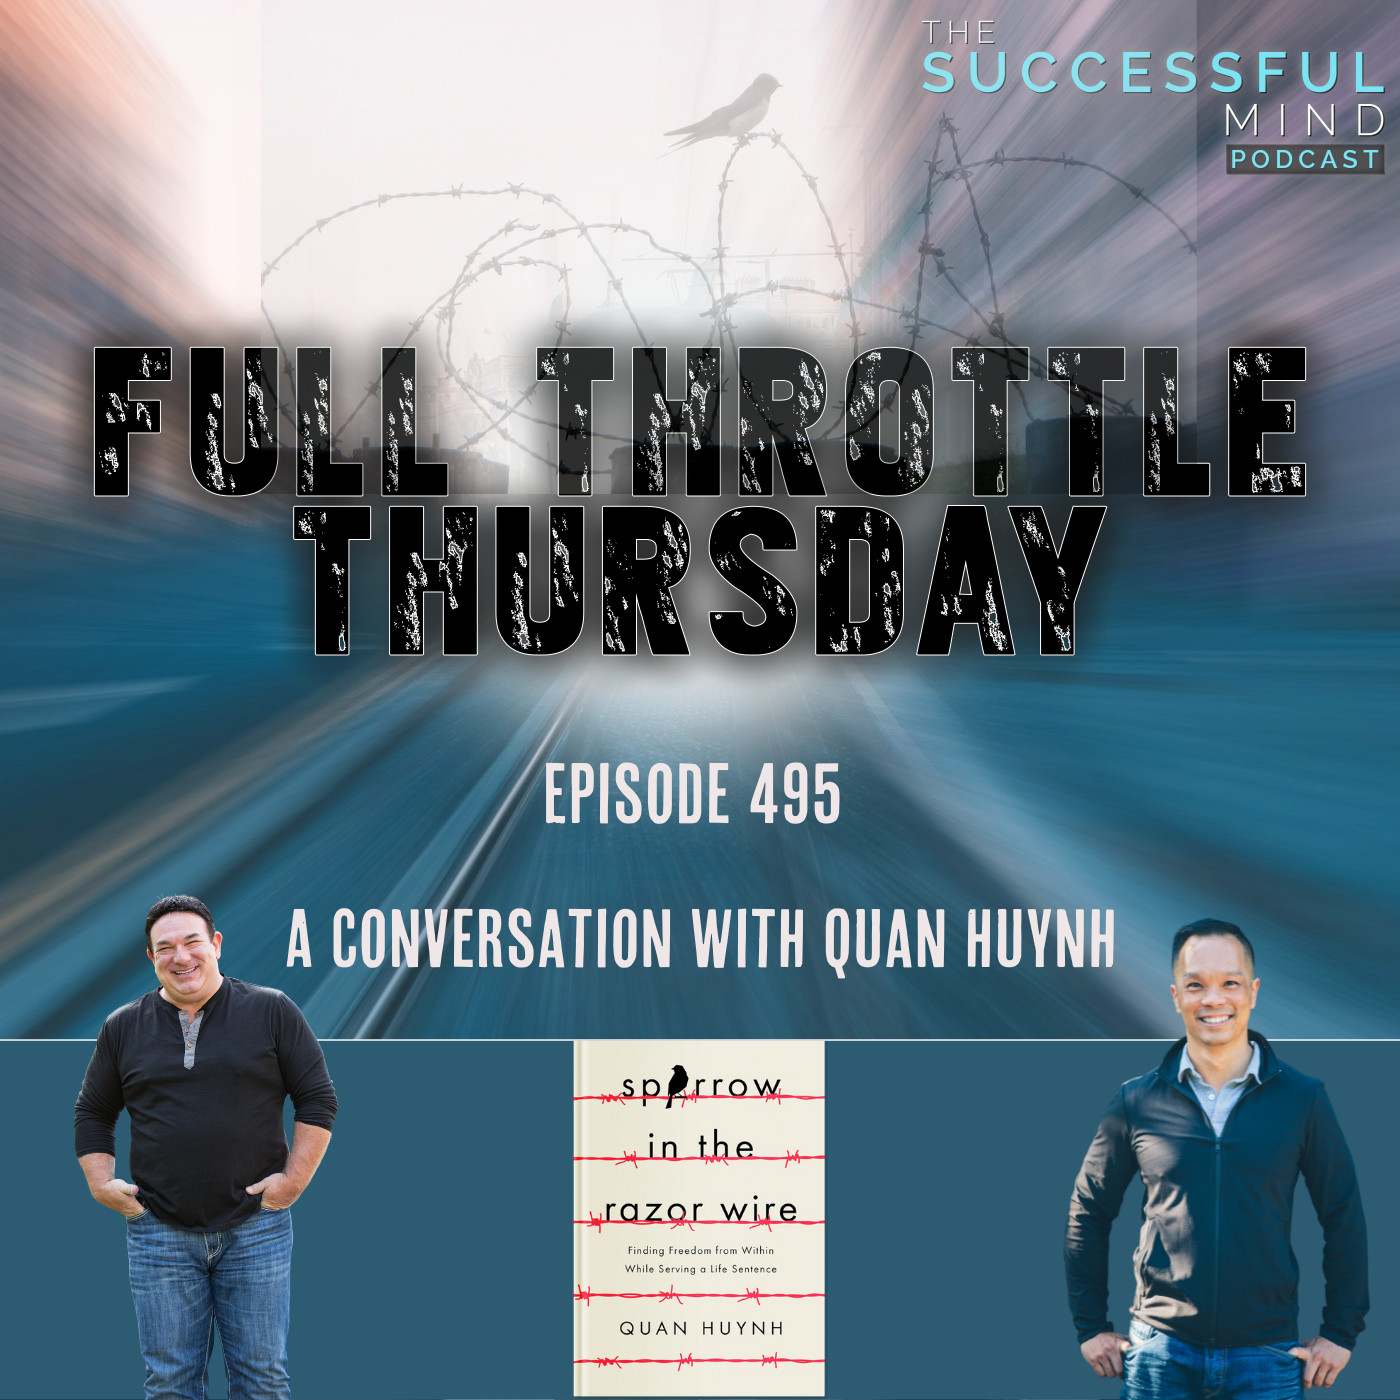 The Successful Mind Podcast - Full Throttle Thursday - A Conversation with Quan Huynh